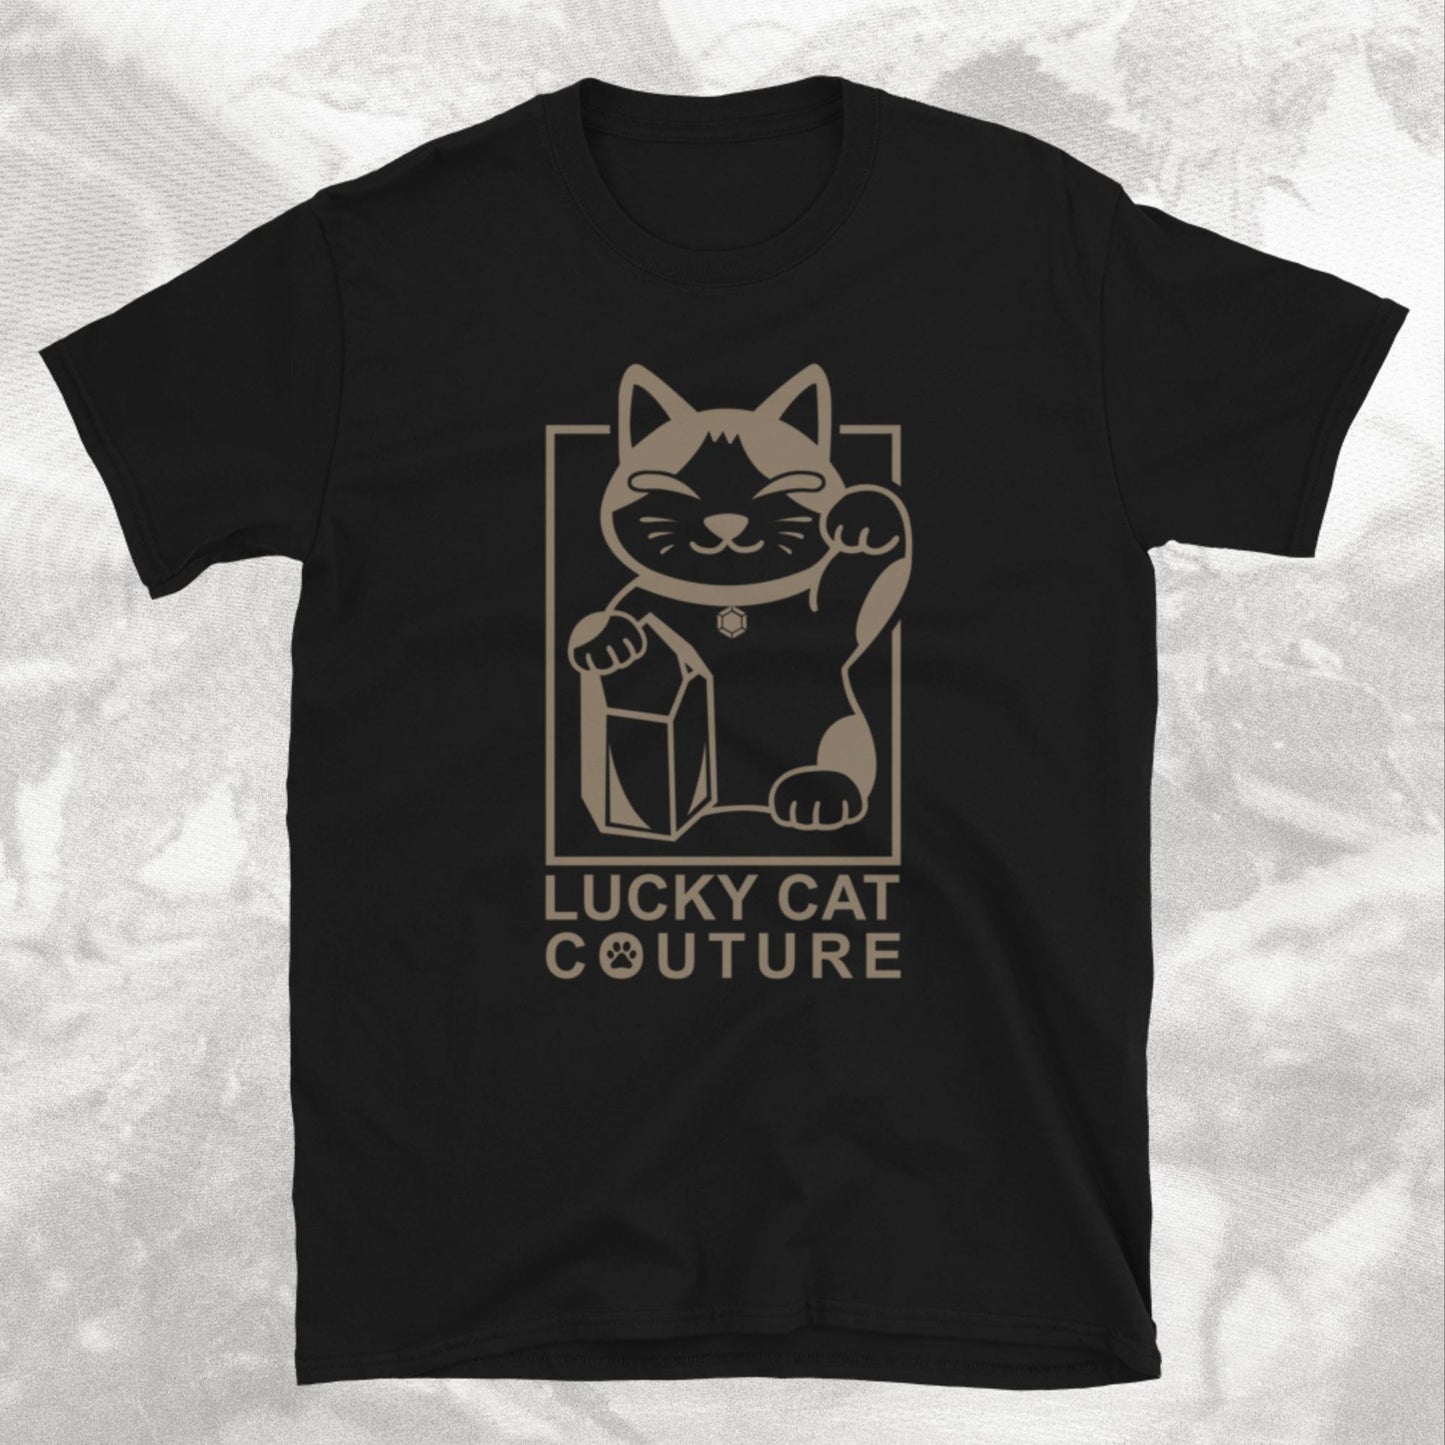 Black Lucky Cat Couture Tee